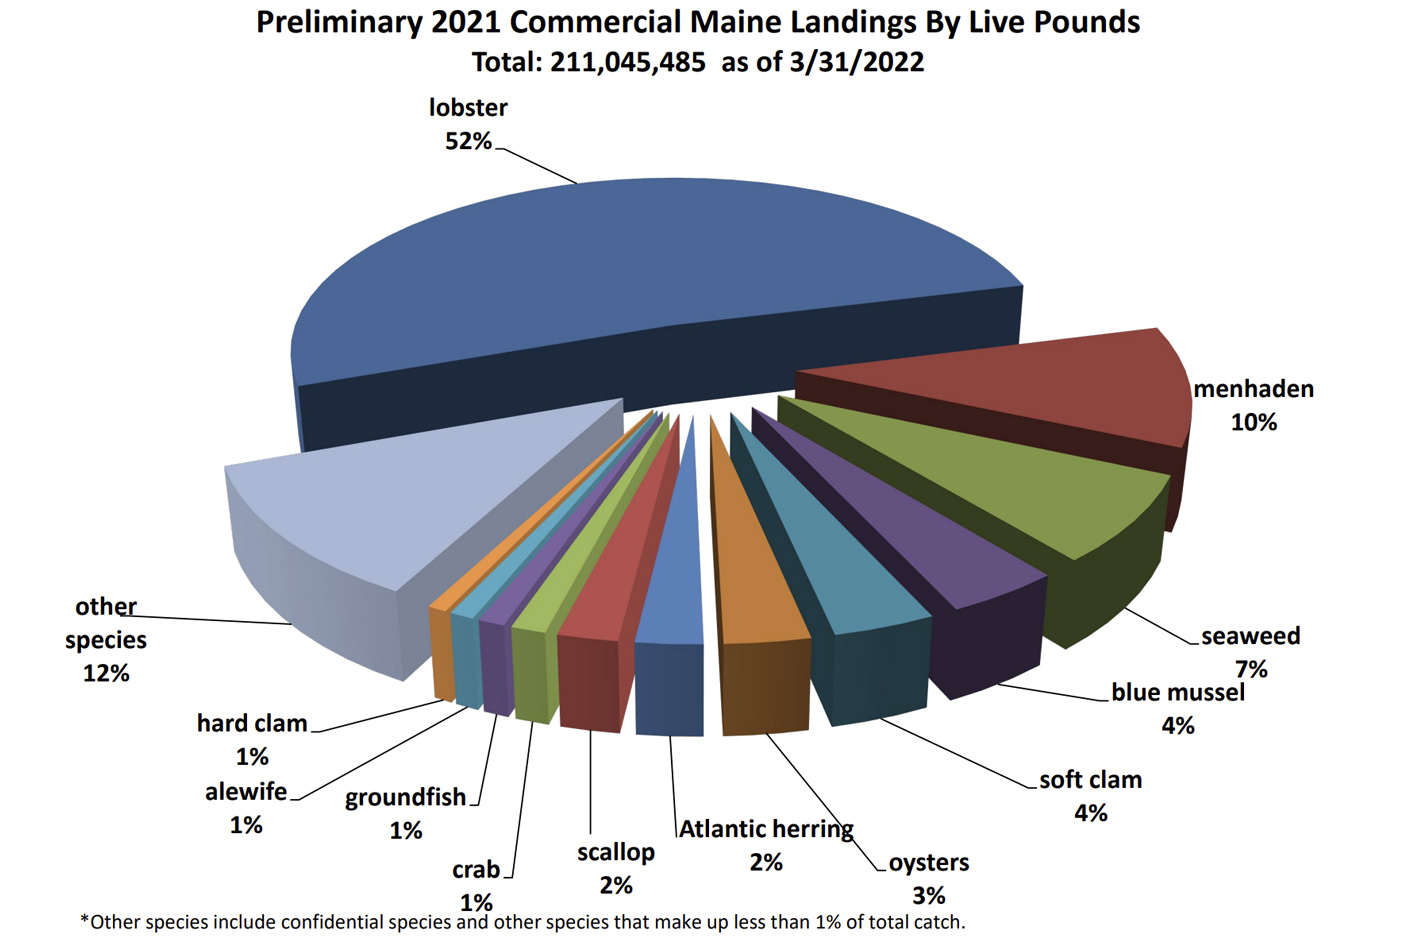 Maine's commercially harvested marine resources reach historic value